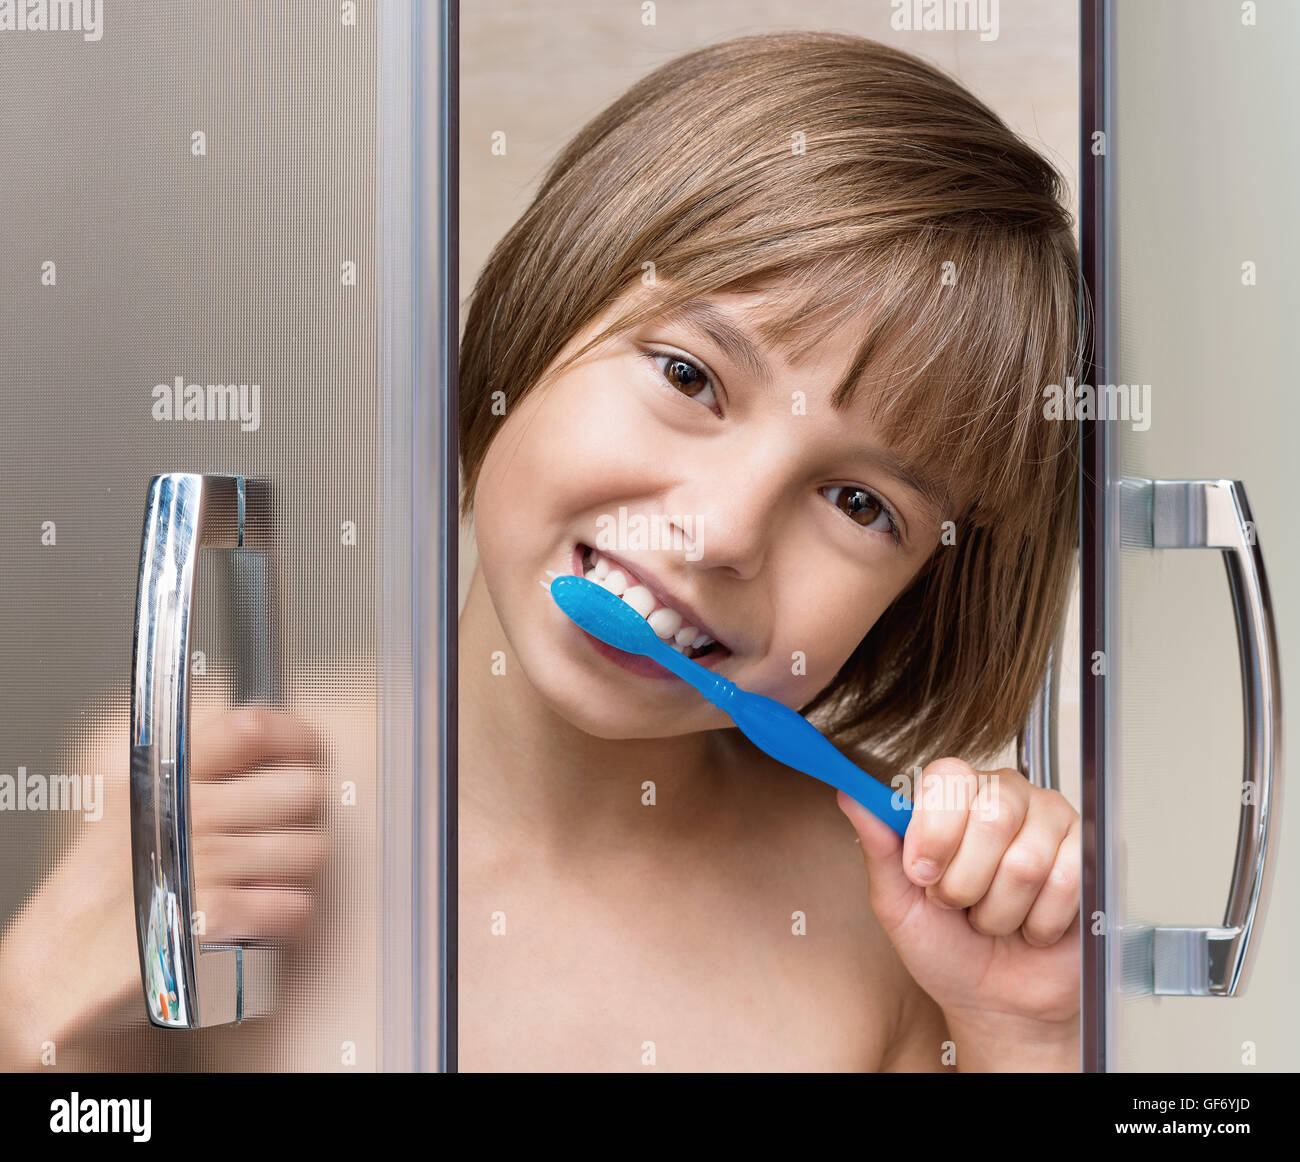 Brushing her teeth with limp images